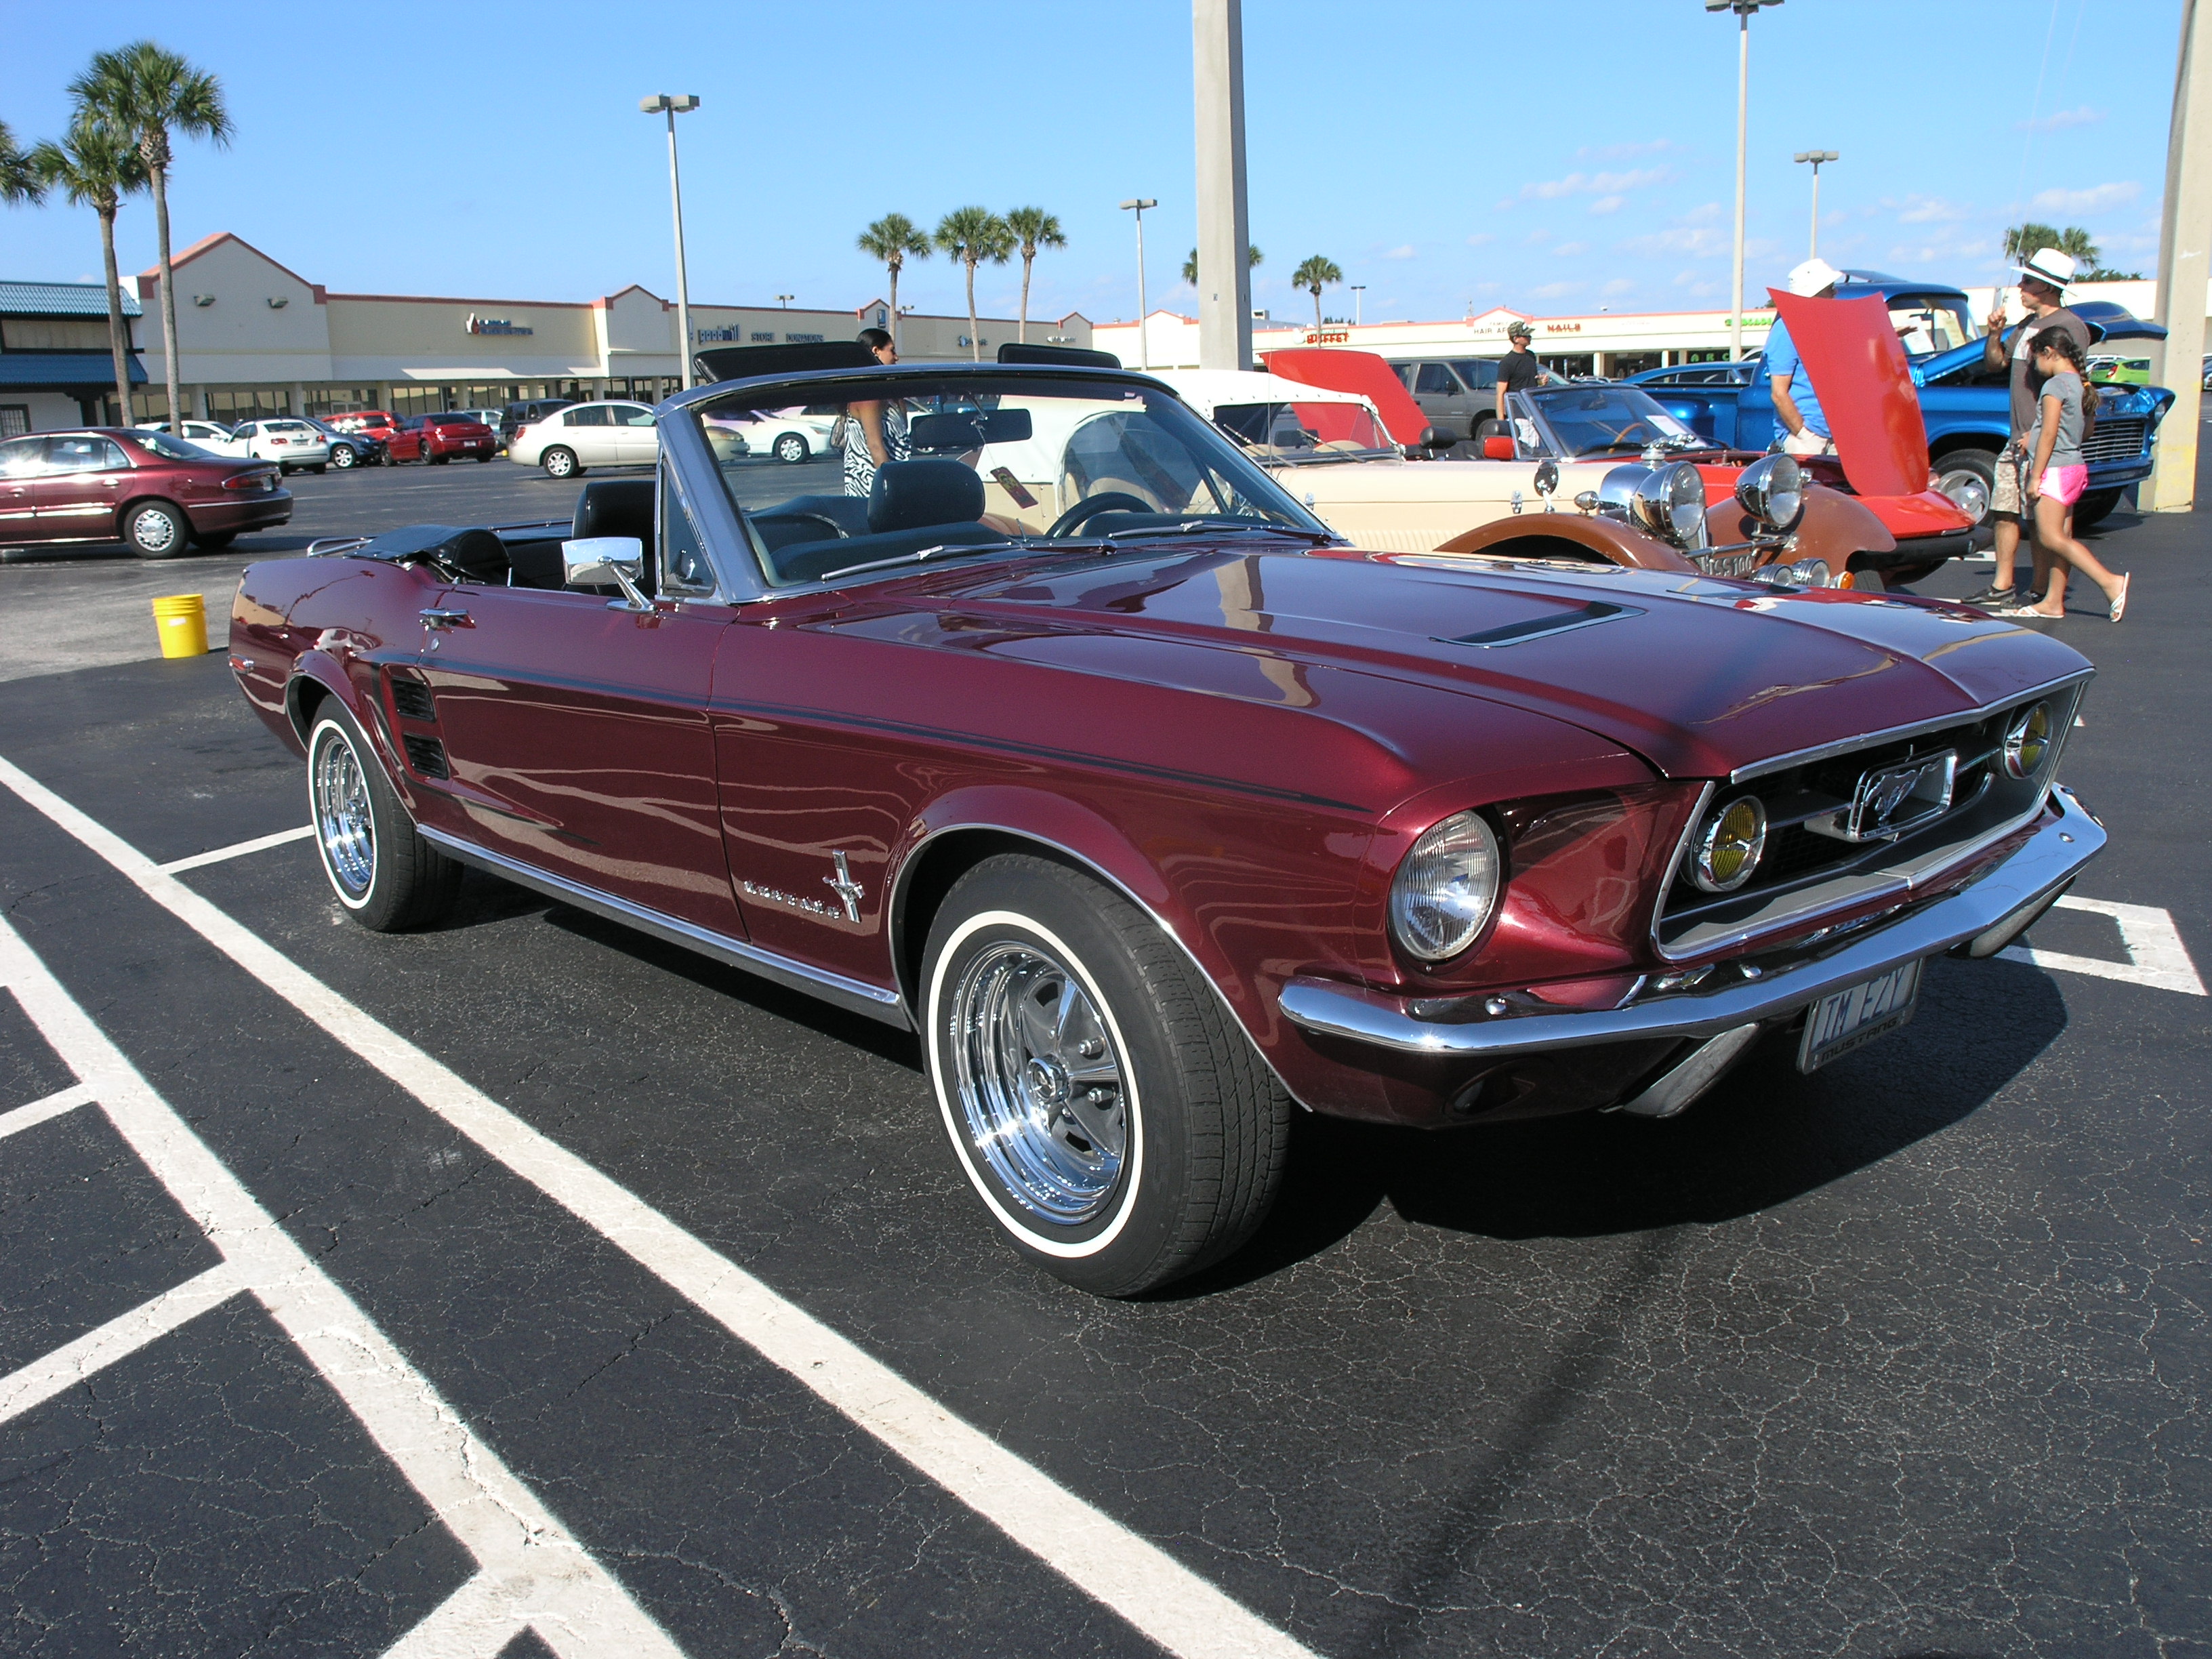 Don's 1967 Mustang